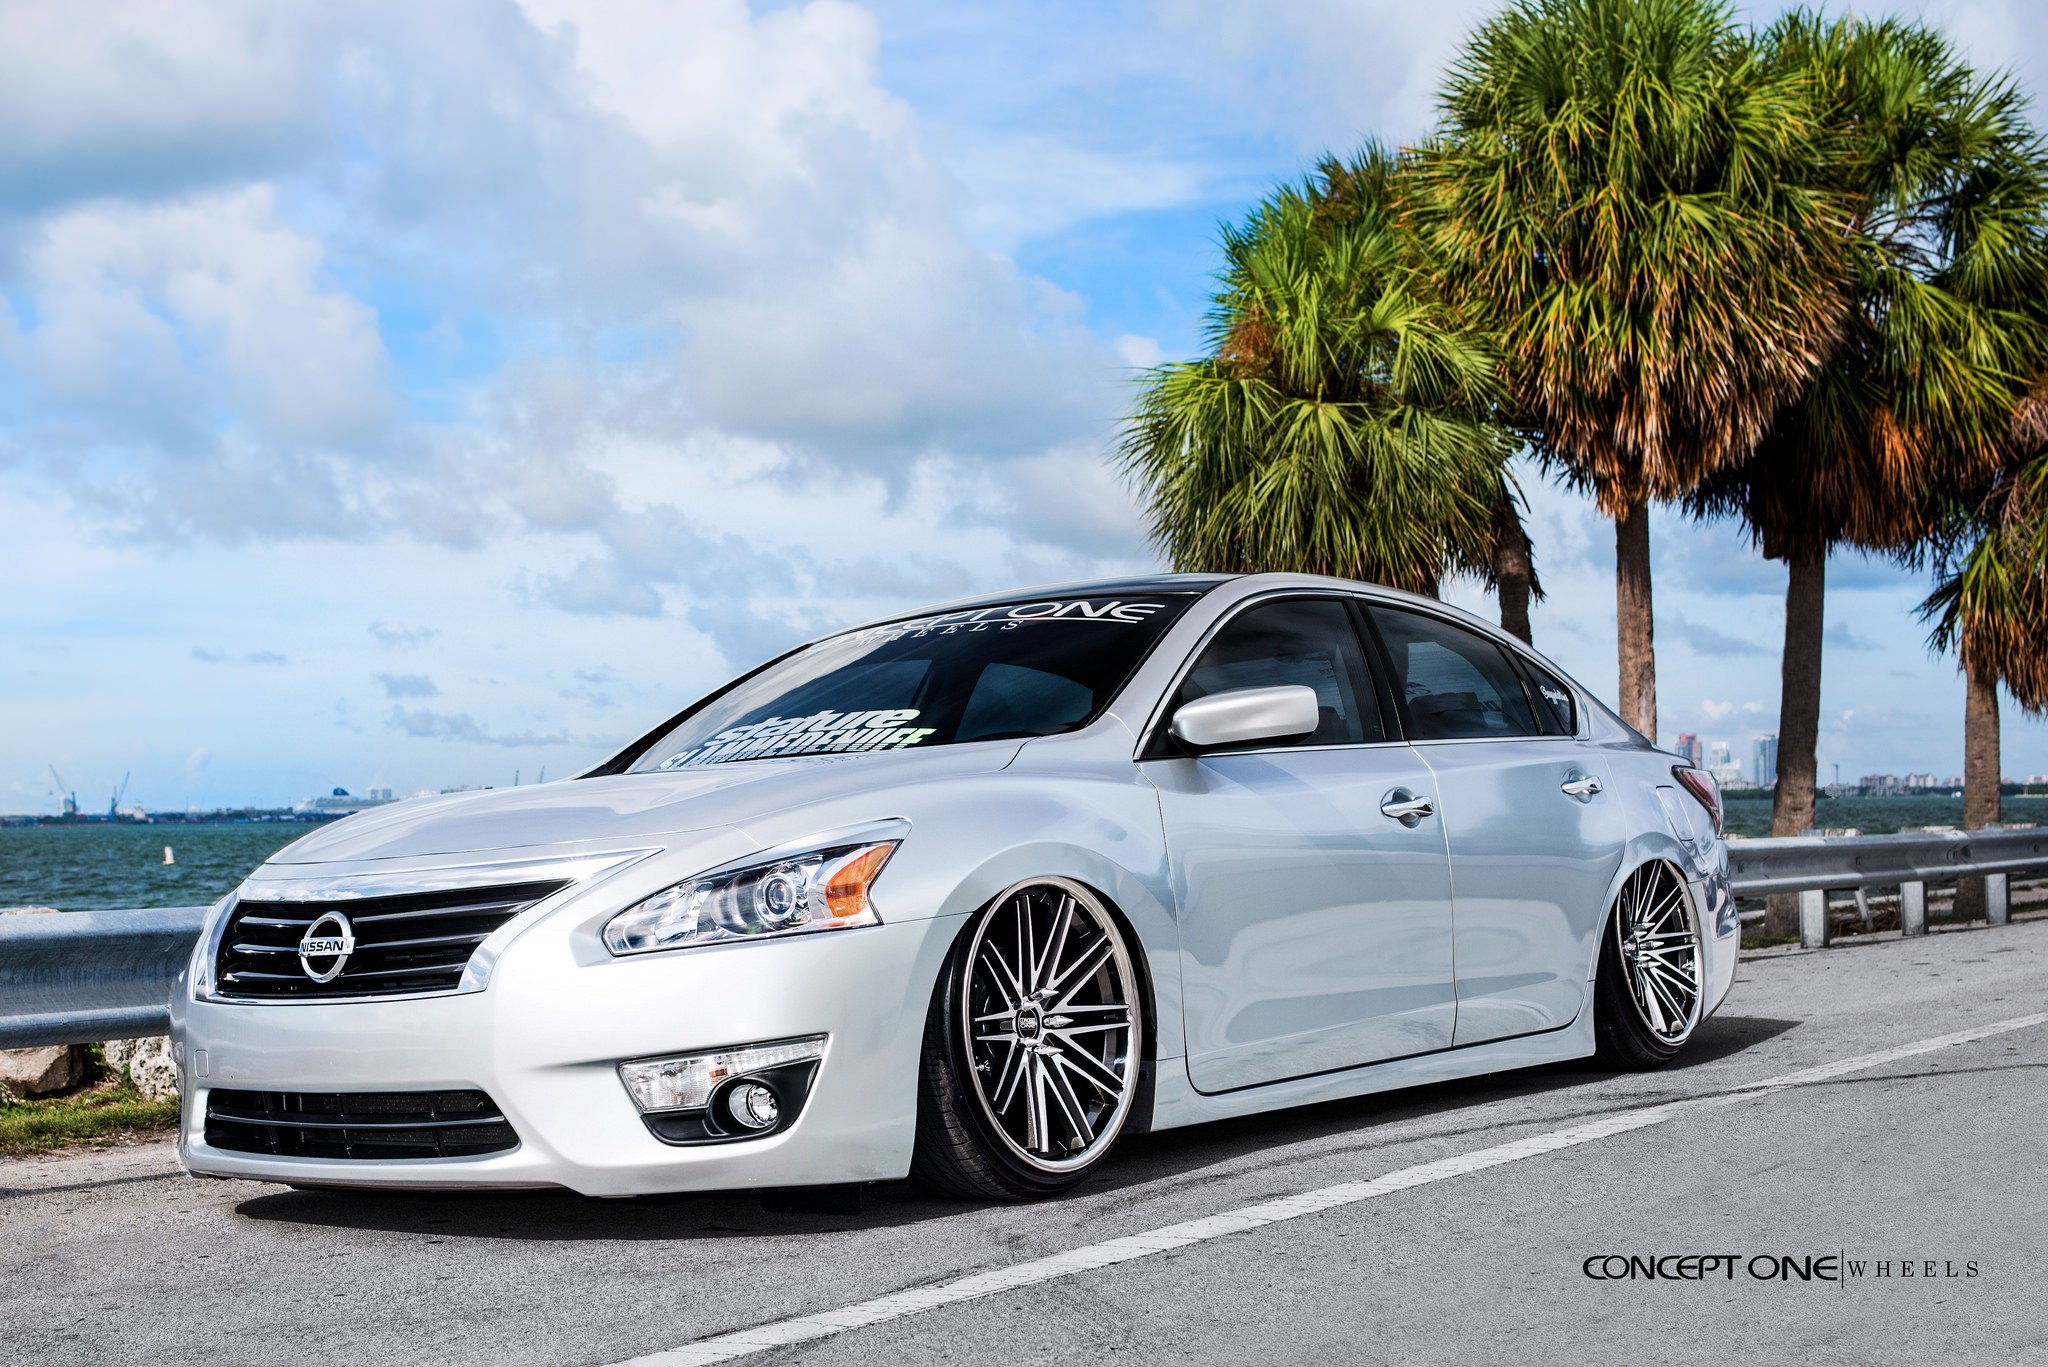 Custom White Pearl Debadged Nissan Altima - Photo by Concept One